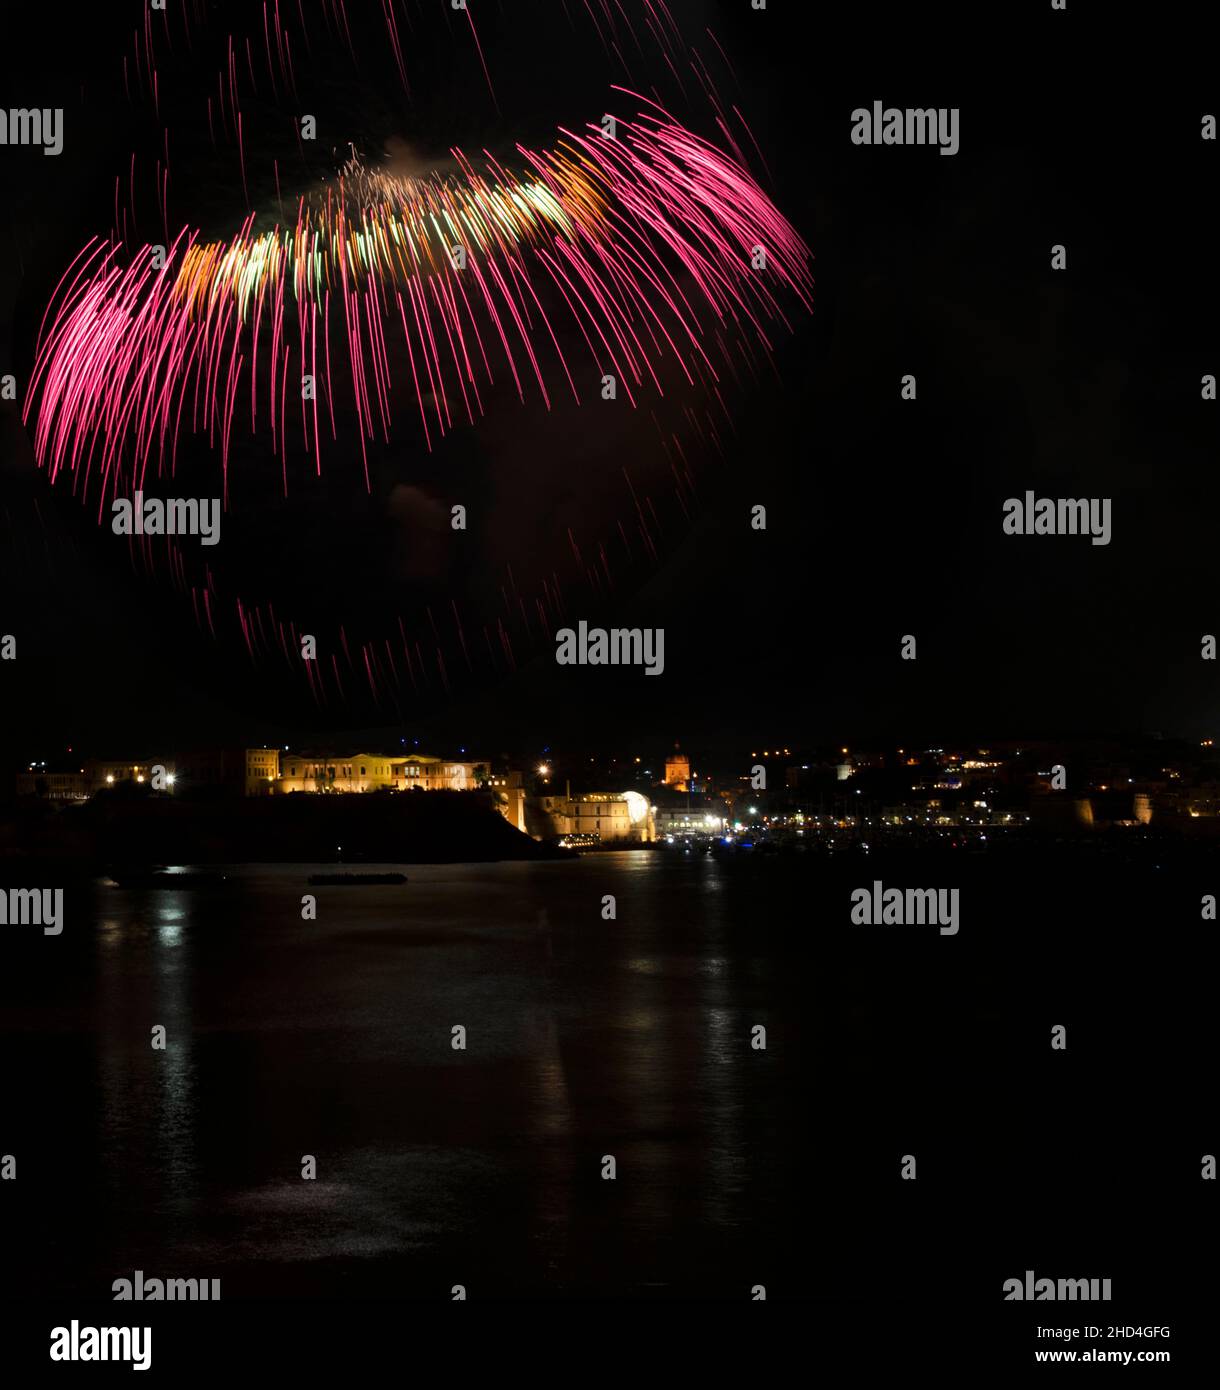 Colorful amazing fireworks in Kalkara, Malta with city view and reflection in the sea, city silhouette, Malta fireworks festival,Independence day,expl Stock Photo